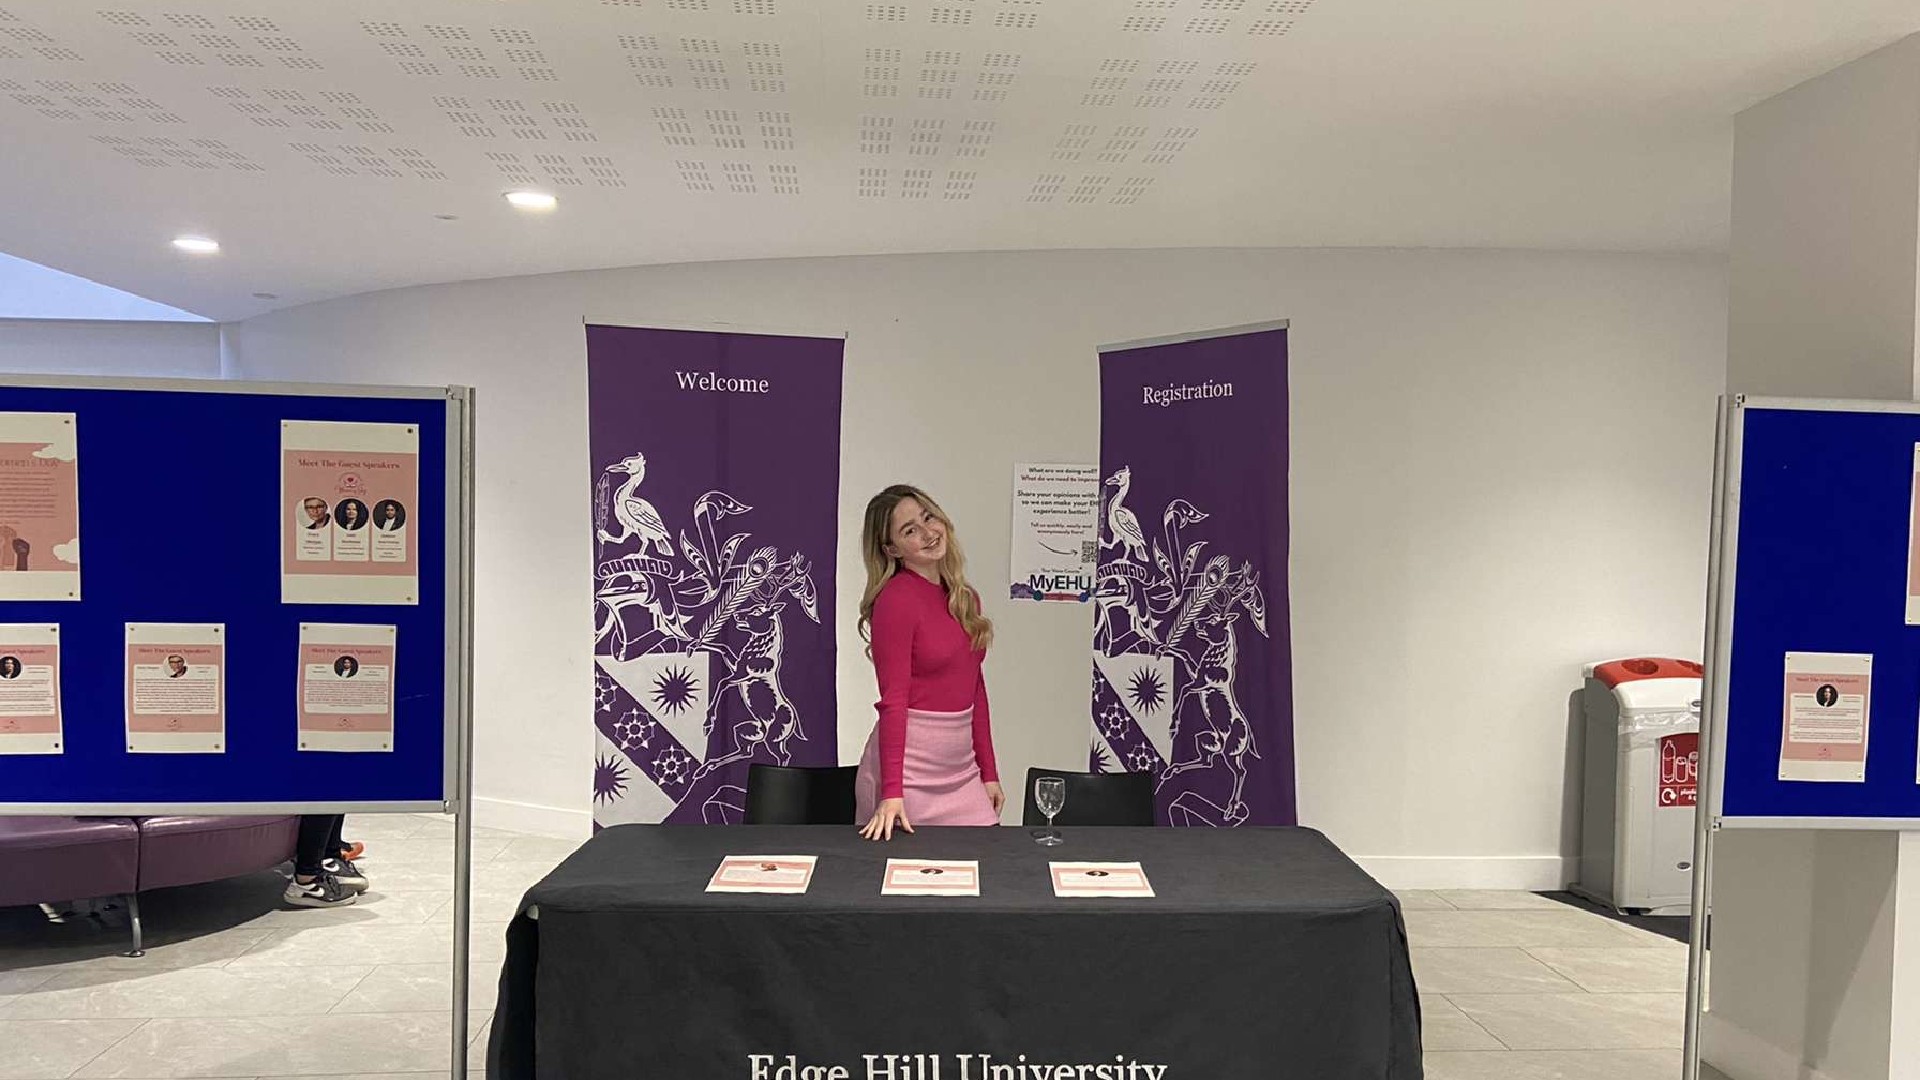 An image of Megan Gough stood behind a table that says "Edge Hill University"